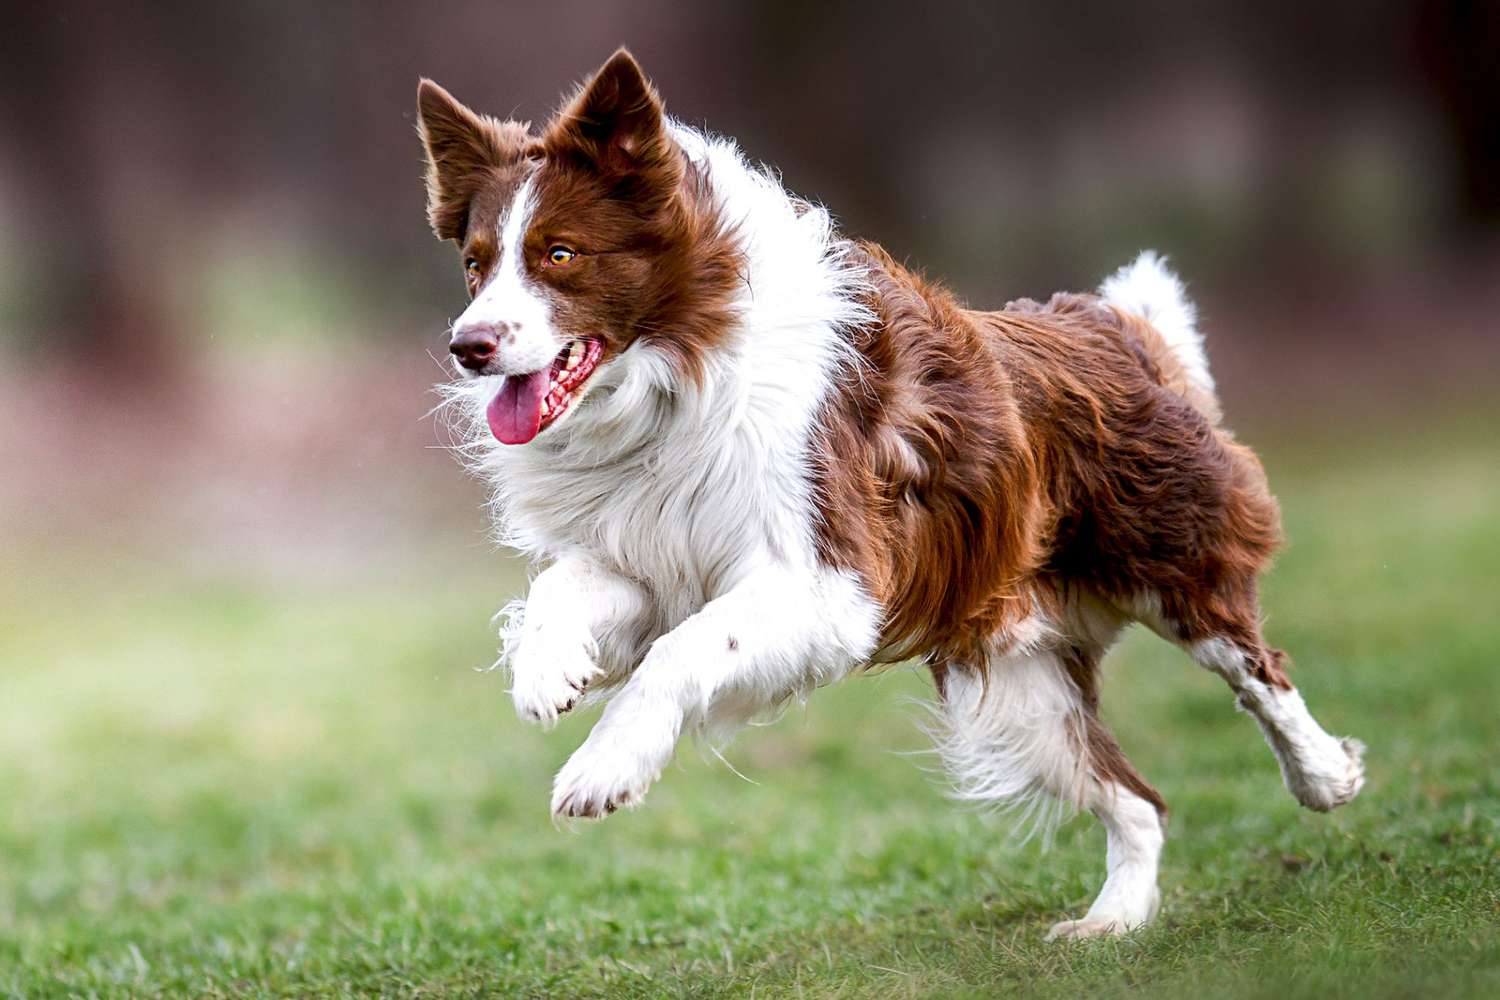 Copper and white border collie bounds across grass